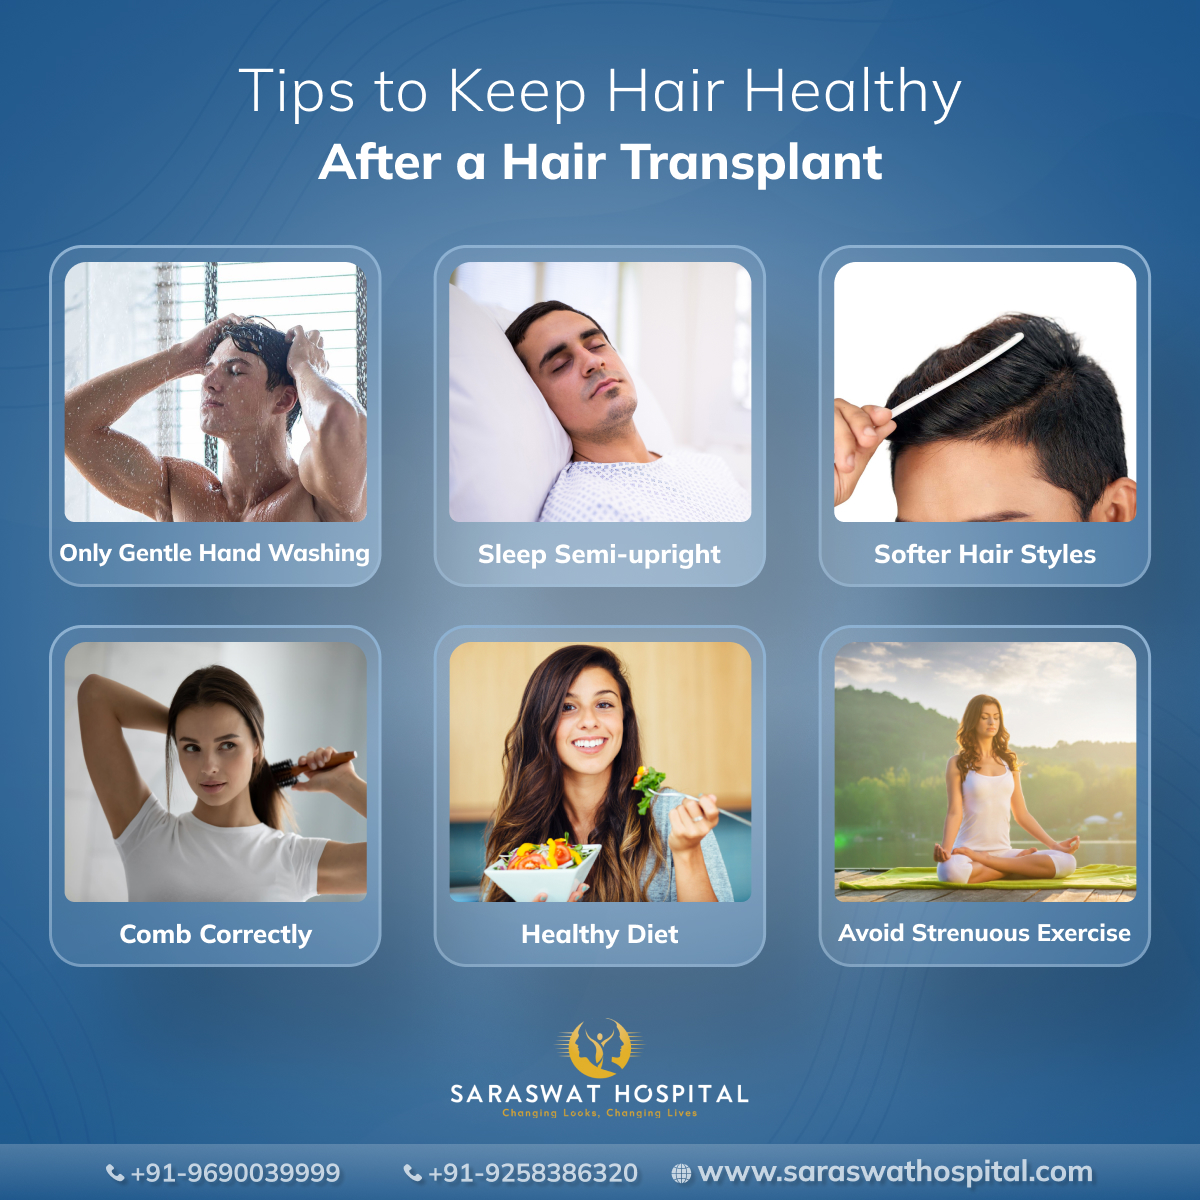 7 Tips to Keep Your New Hair Healthy After a Hair Transplant